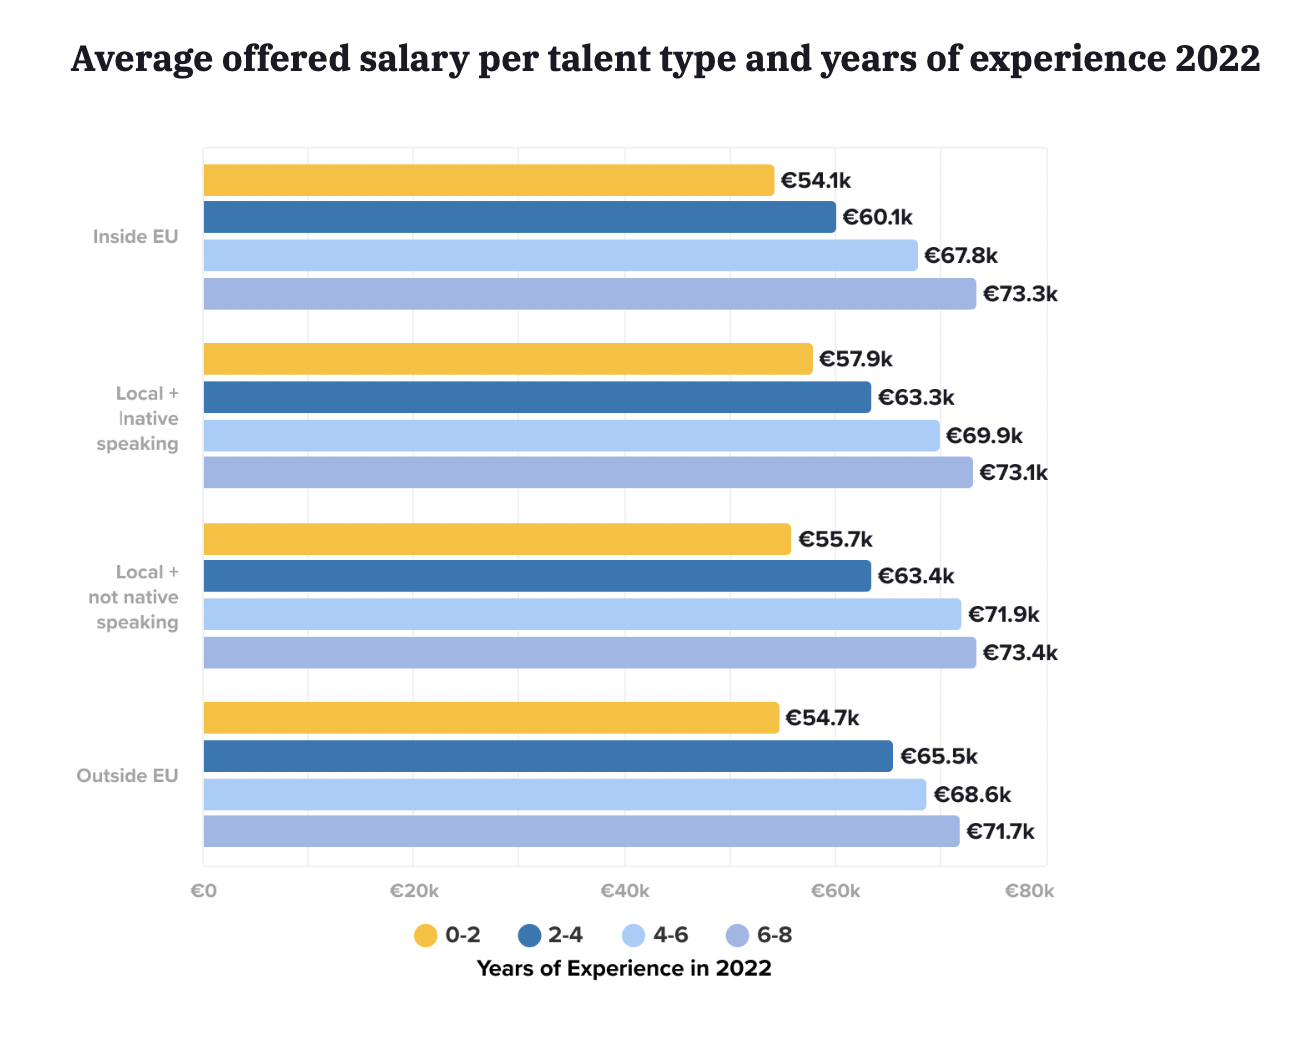 Average offered salary per talent type and years of experience in Germany in 2022 